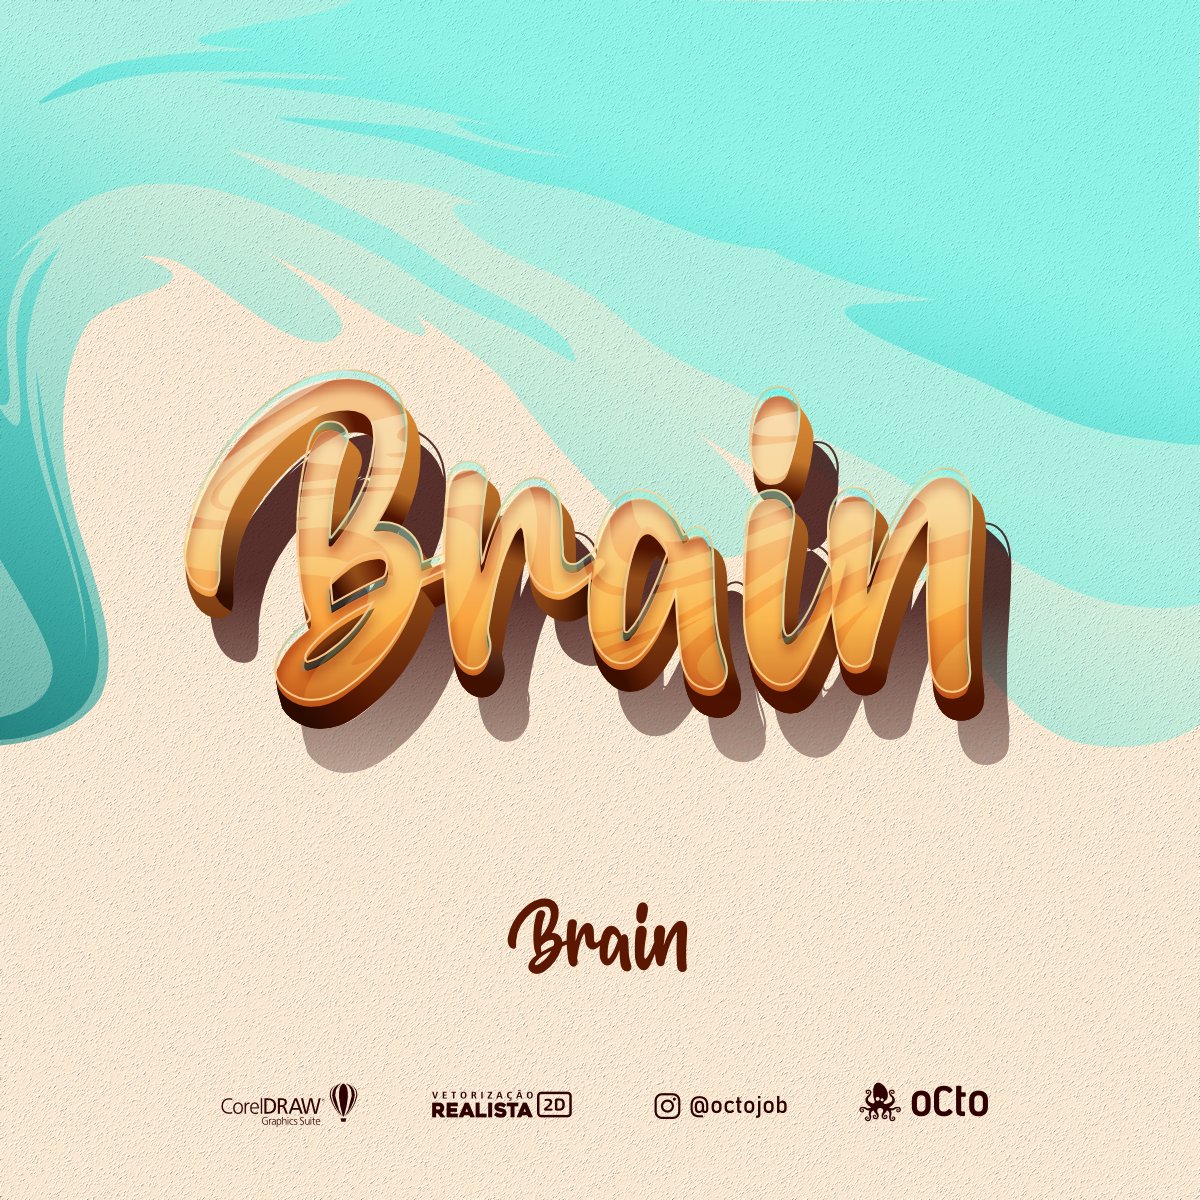 Dive into the mind-bending world of OCTO's imagination with 'Brain'! 🌊 This design isn't just waves and grains; it's a journey through creativity. Did you know OCTO worked magic with CorelDRAW to bring this to life?